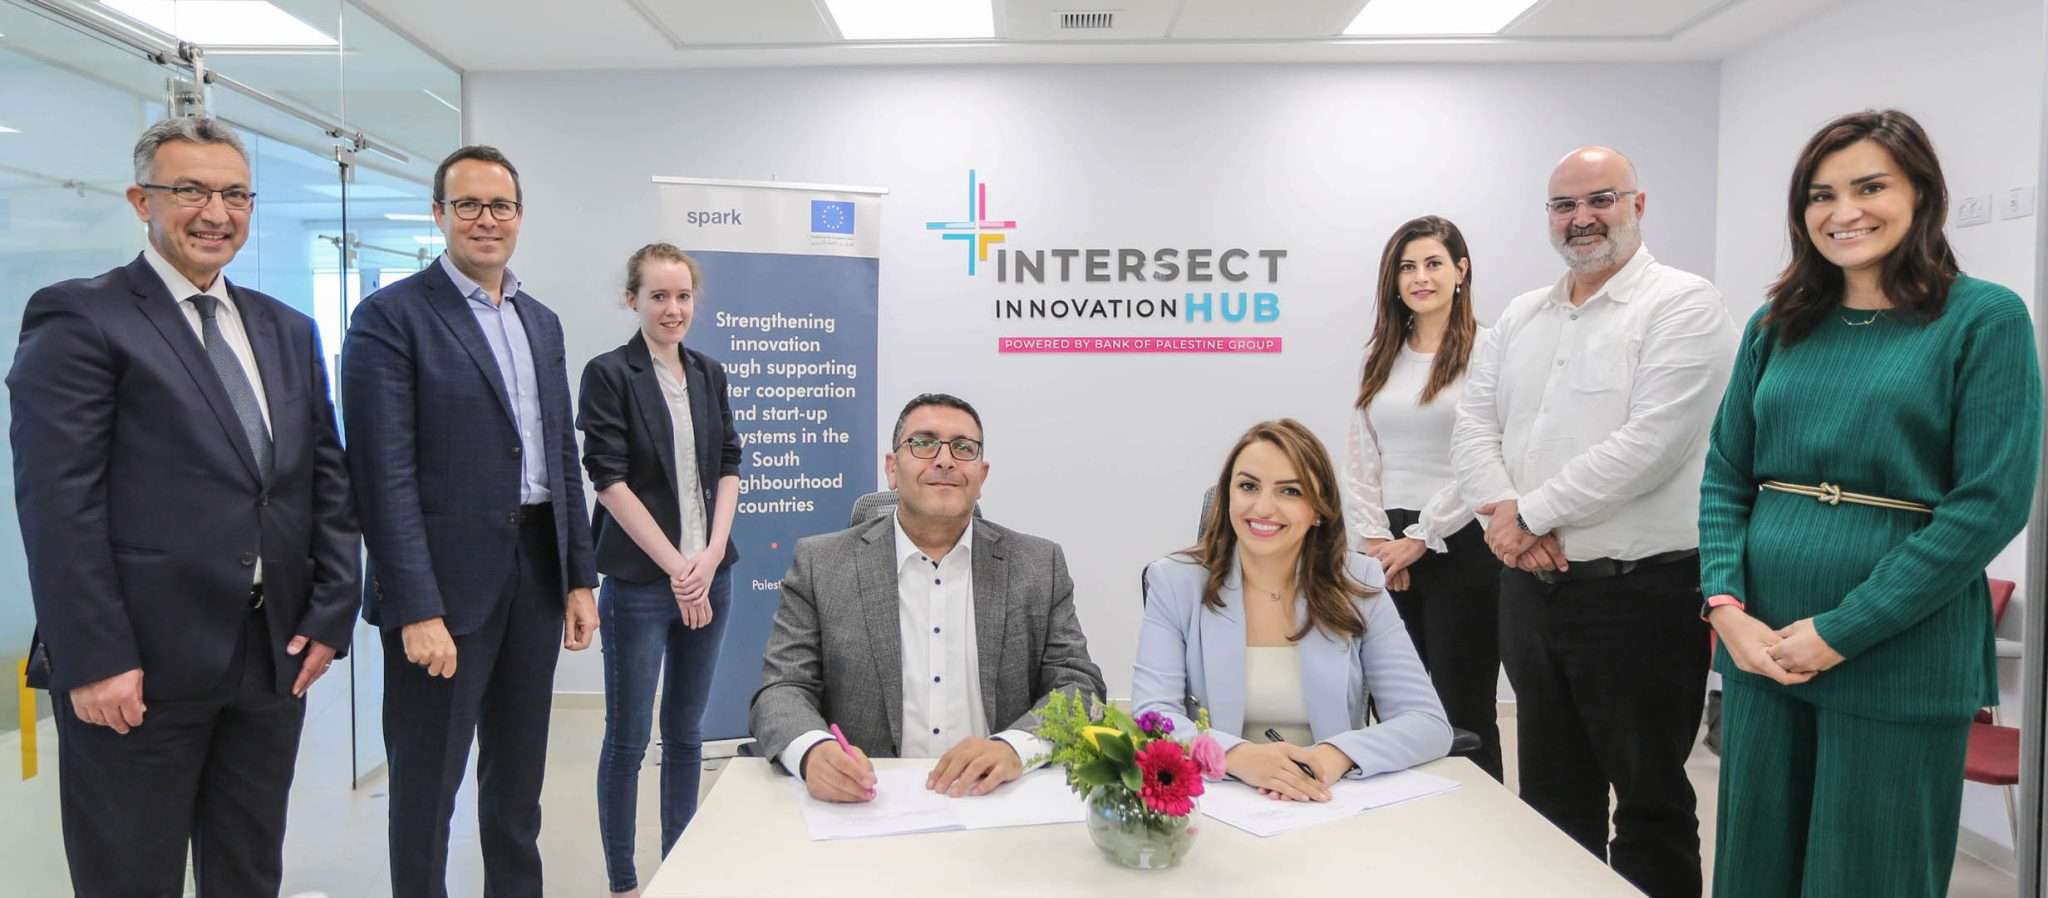 Intersect Innovation Hub and SPARK Palestine launch program to support Palestinian entrepreneurs with funding from the European Union